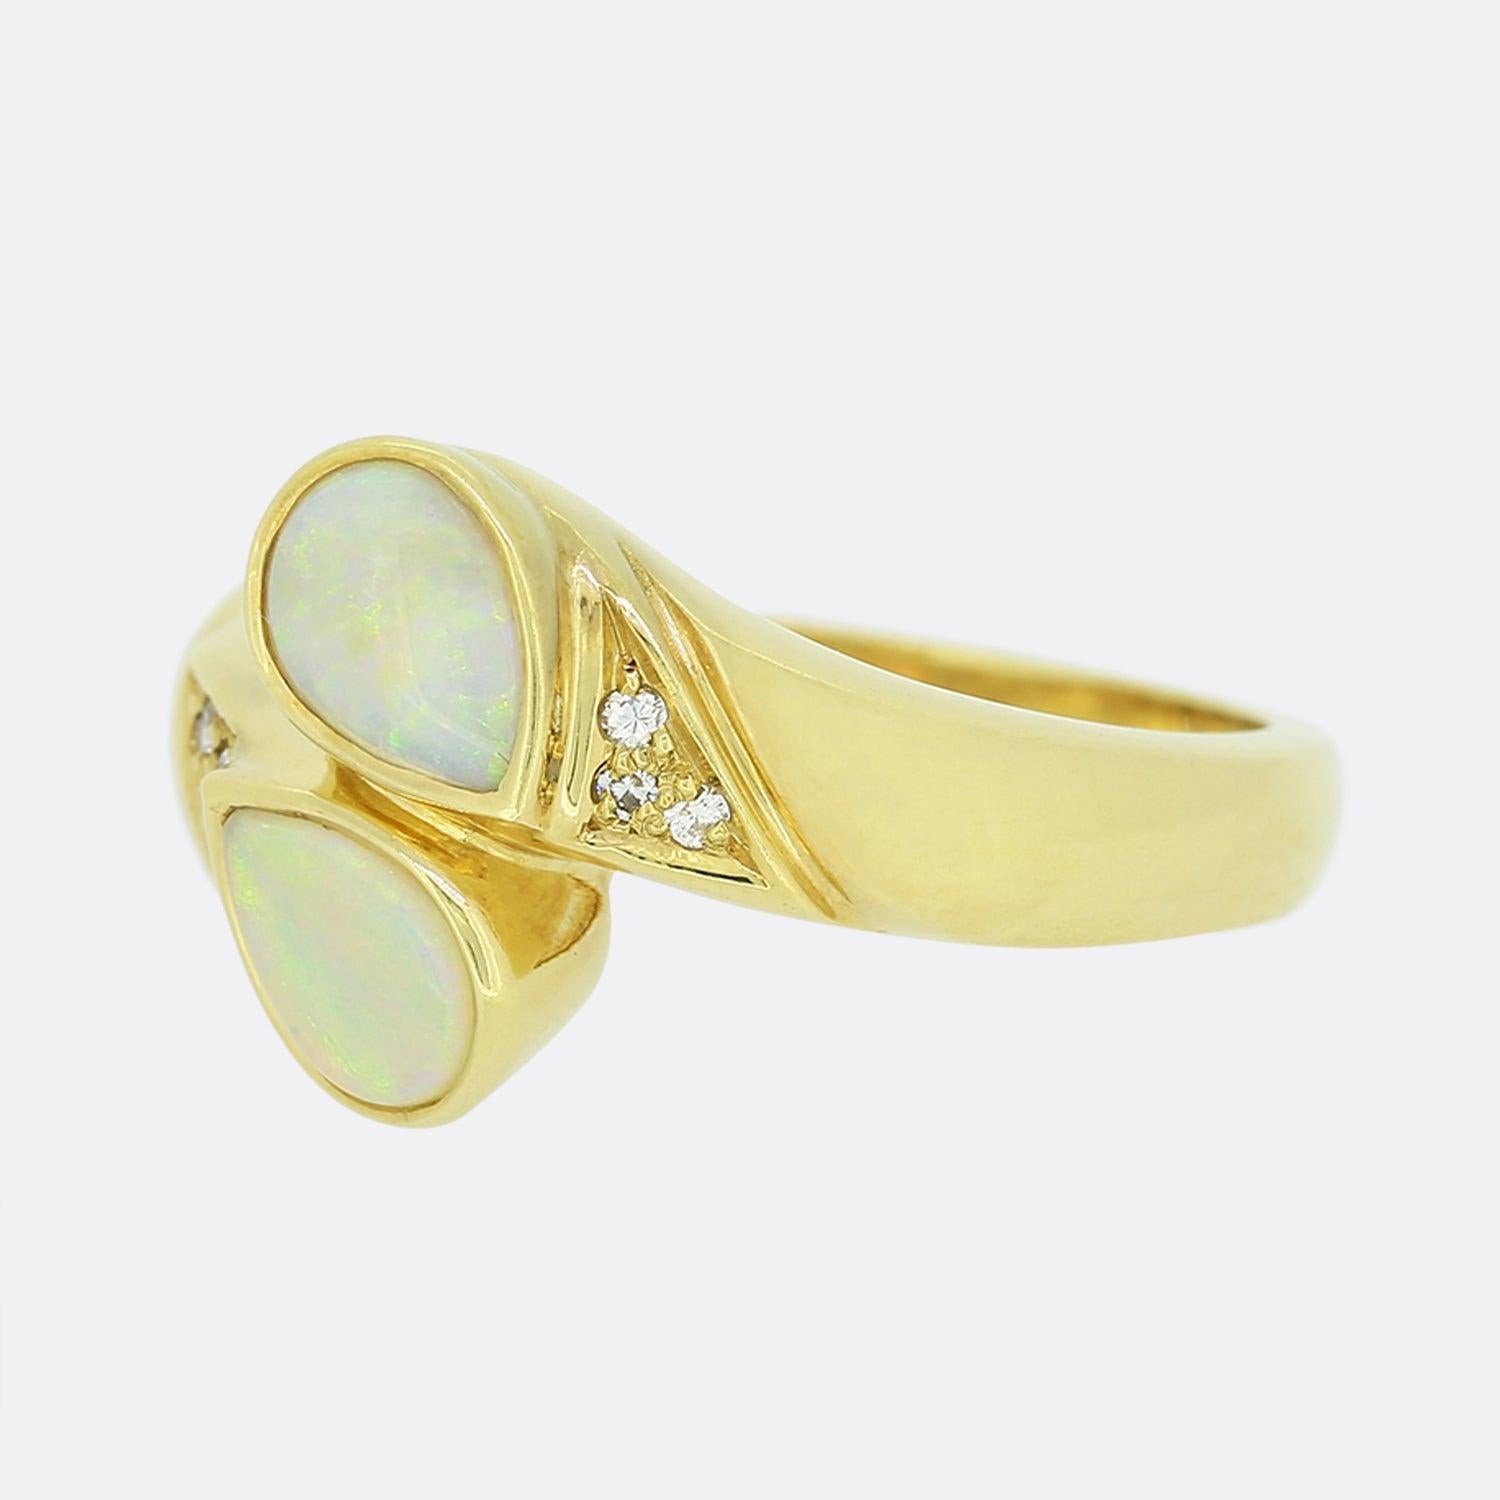 This is an 18ct yellow gold white opal and diamond abstract ring. Each central opal is rub-over set, pear shaped and has an excellent white body of colour. These focal opals are highly complimented by the two trios of round cut natural diamonds